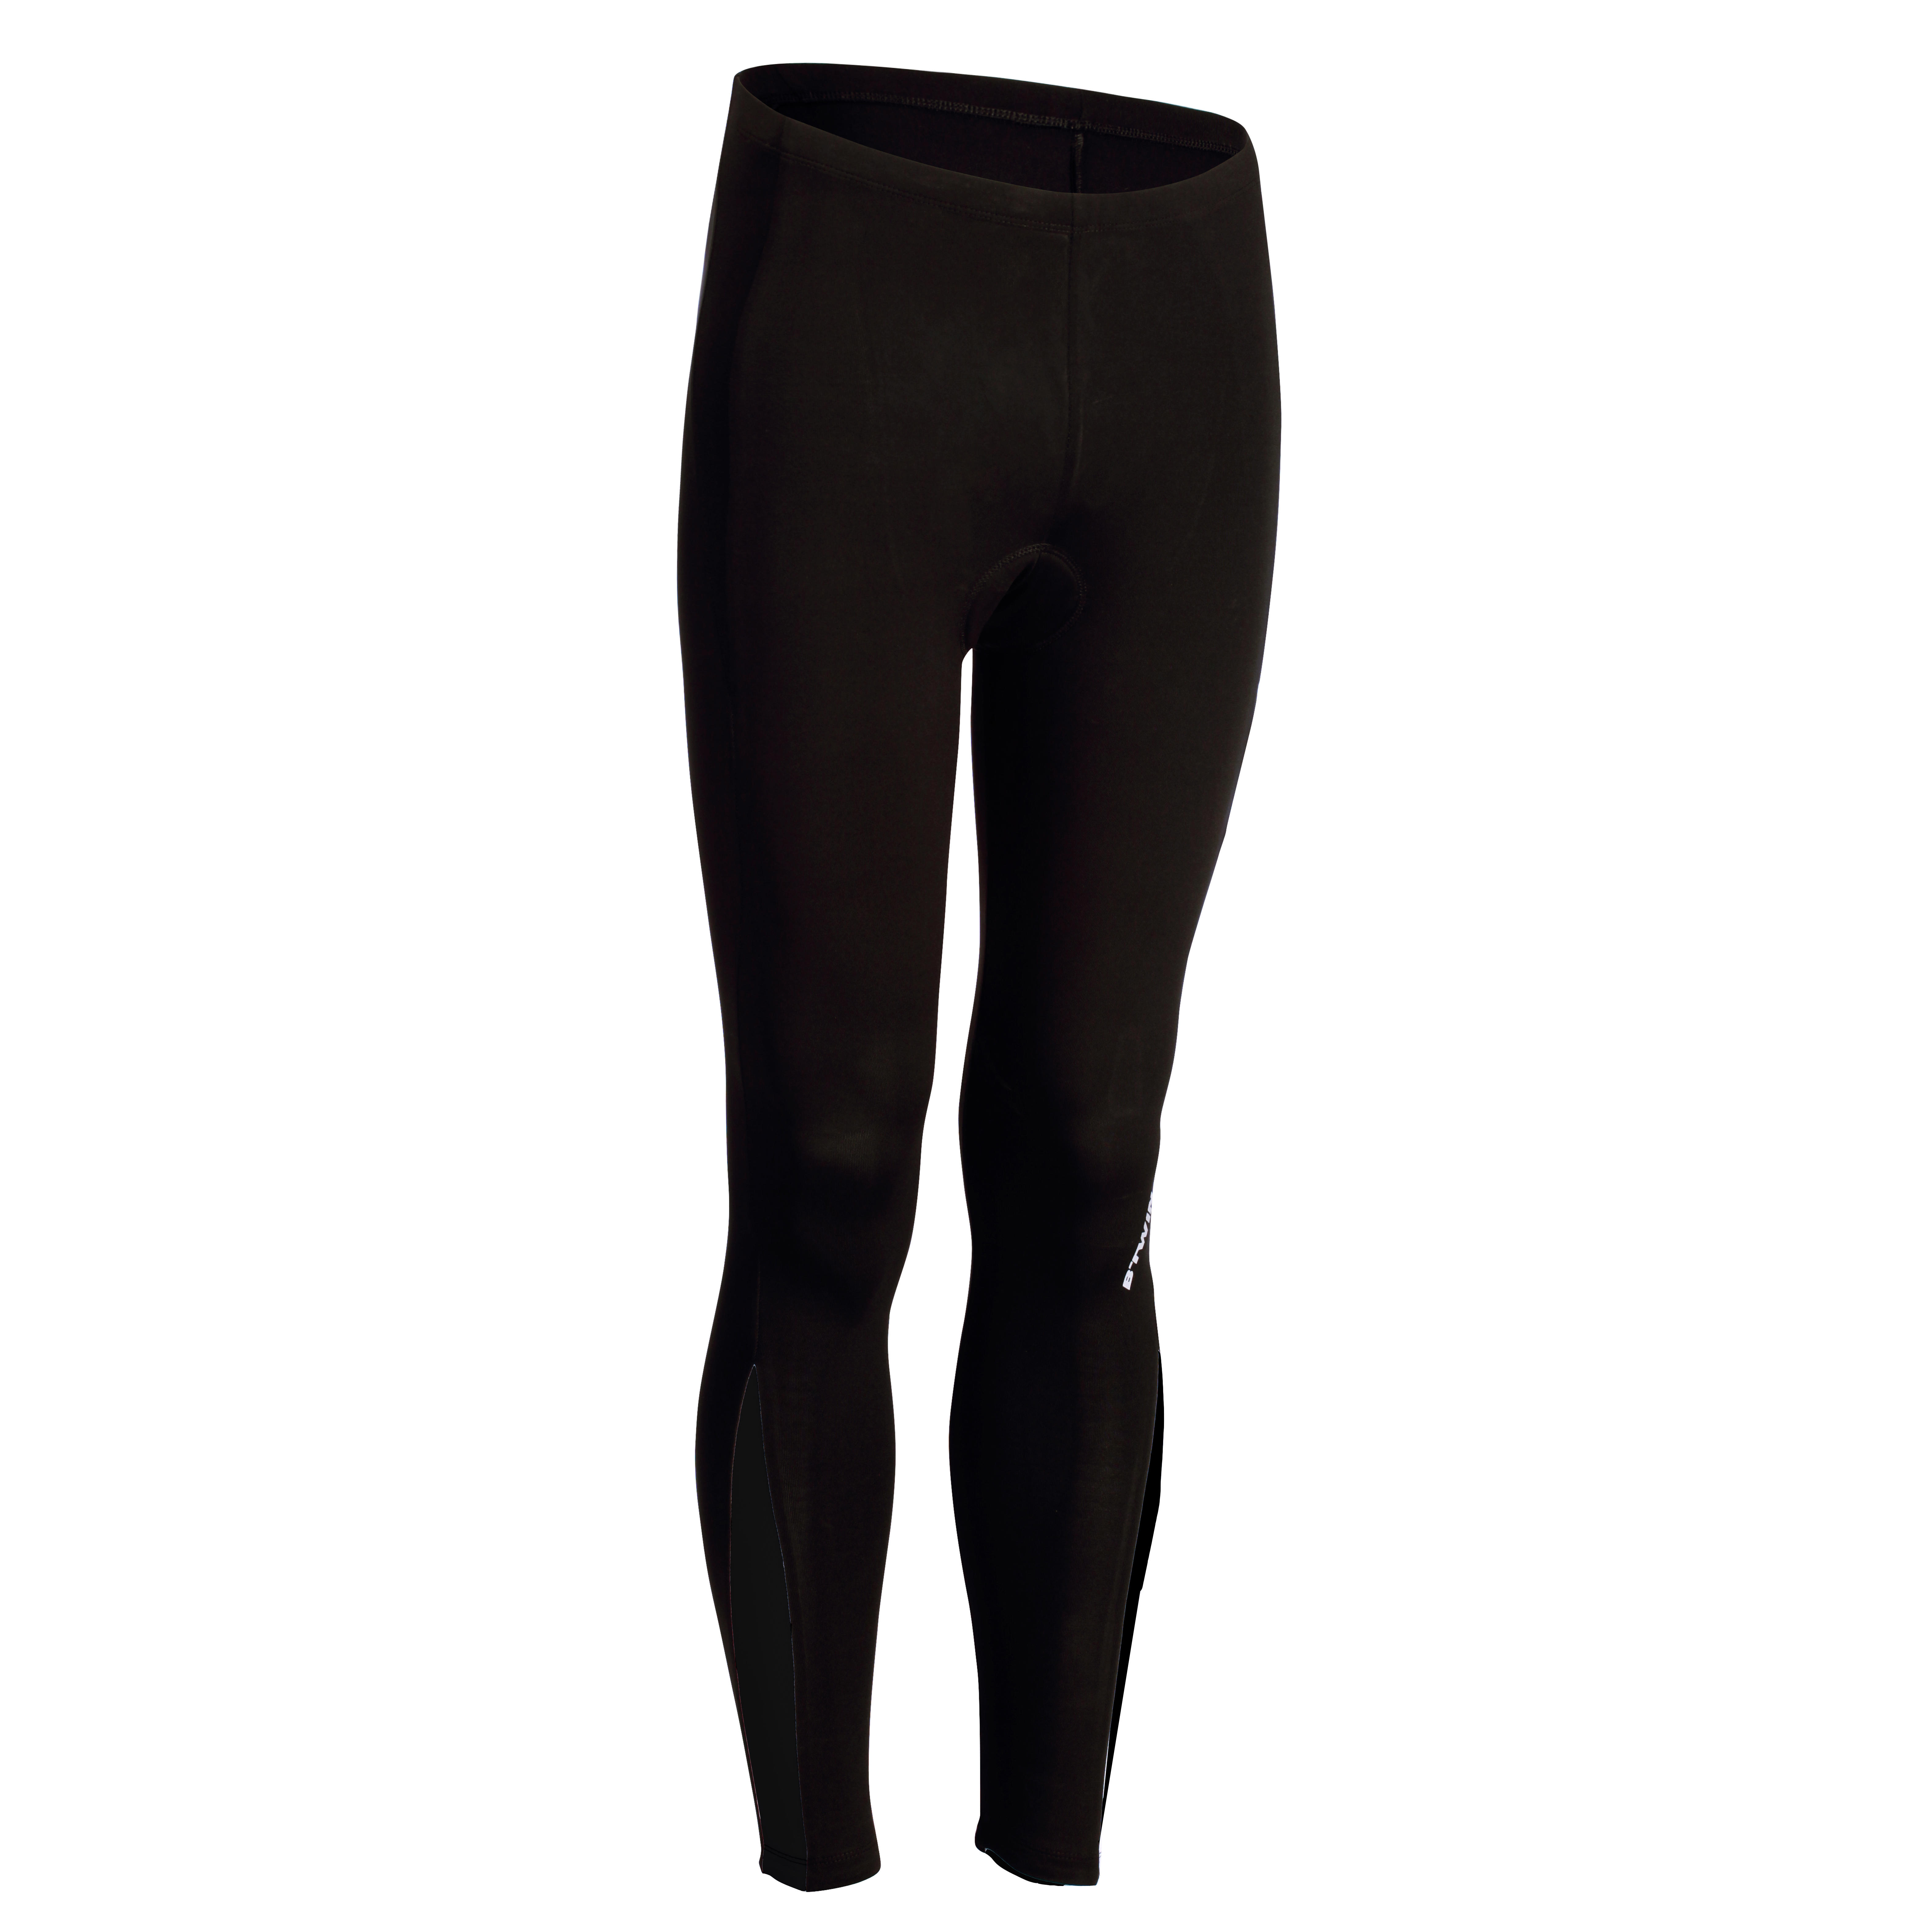 Cycling Leggings For Men | International Society of Precision Agriculture